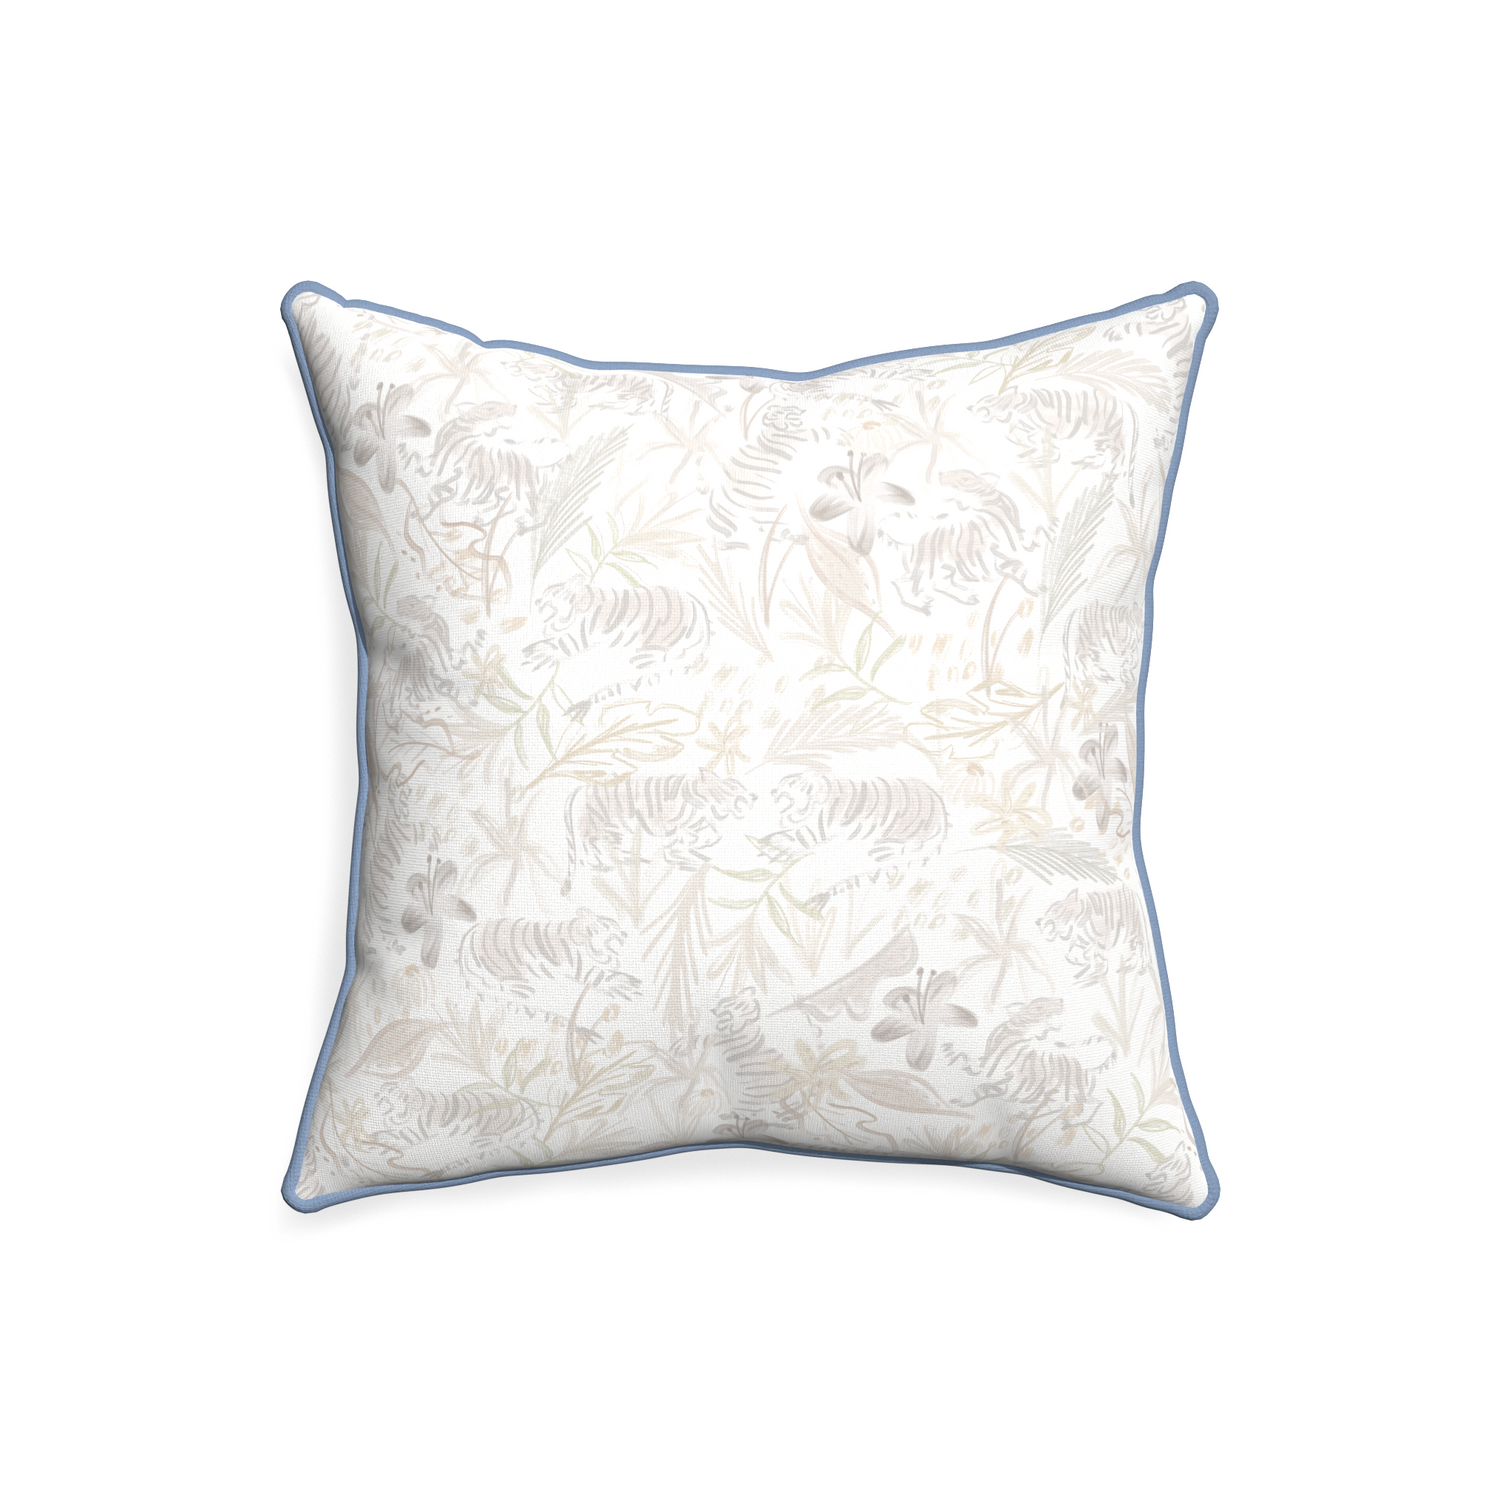 20-square frida sand custom beige chinoiserie tigerpillow with sky piping on white background